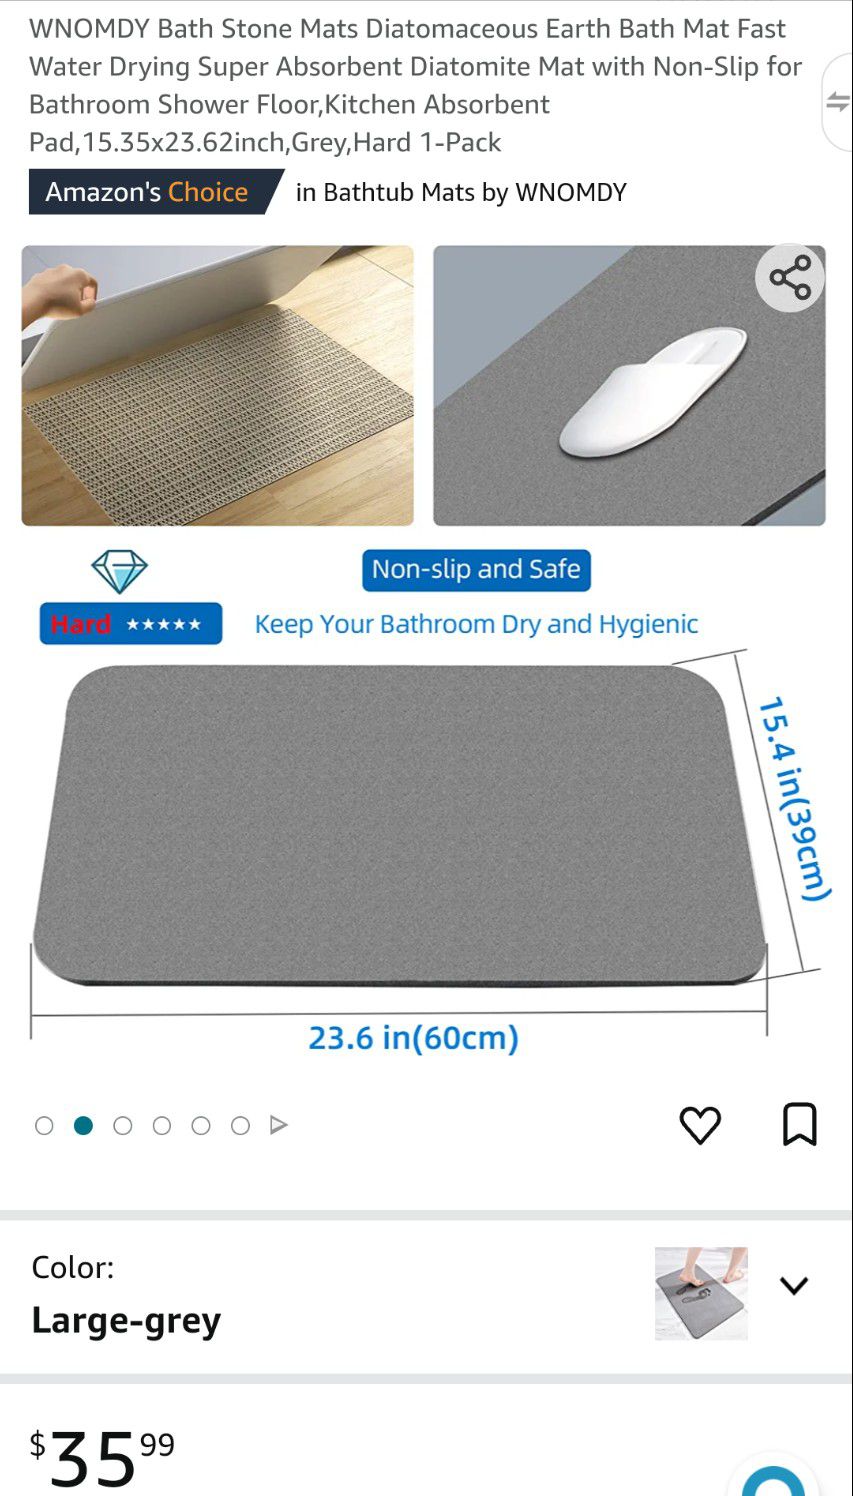 WNOMDY Bath Stone Mats Diatomaceous Earth Bath Mat Fast Water Drying Super  Absorbent Diatomite Mat with Non-Slip for Bathroom Shower Floor,Kitchen